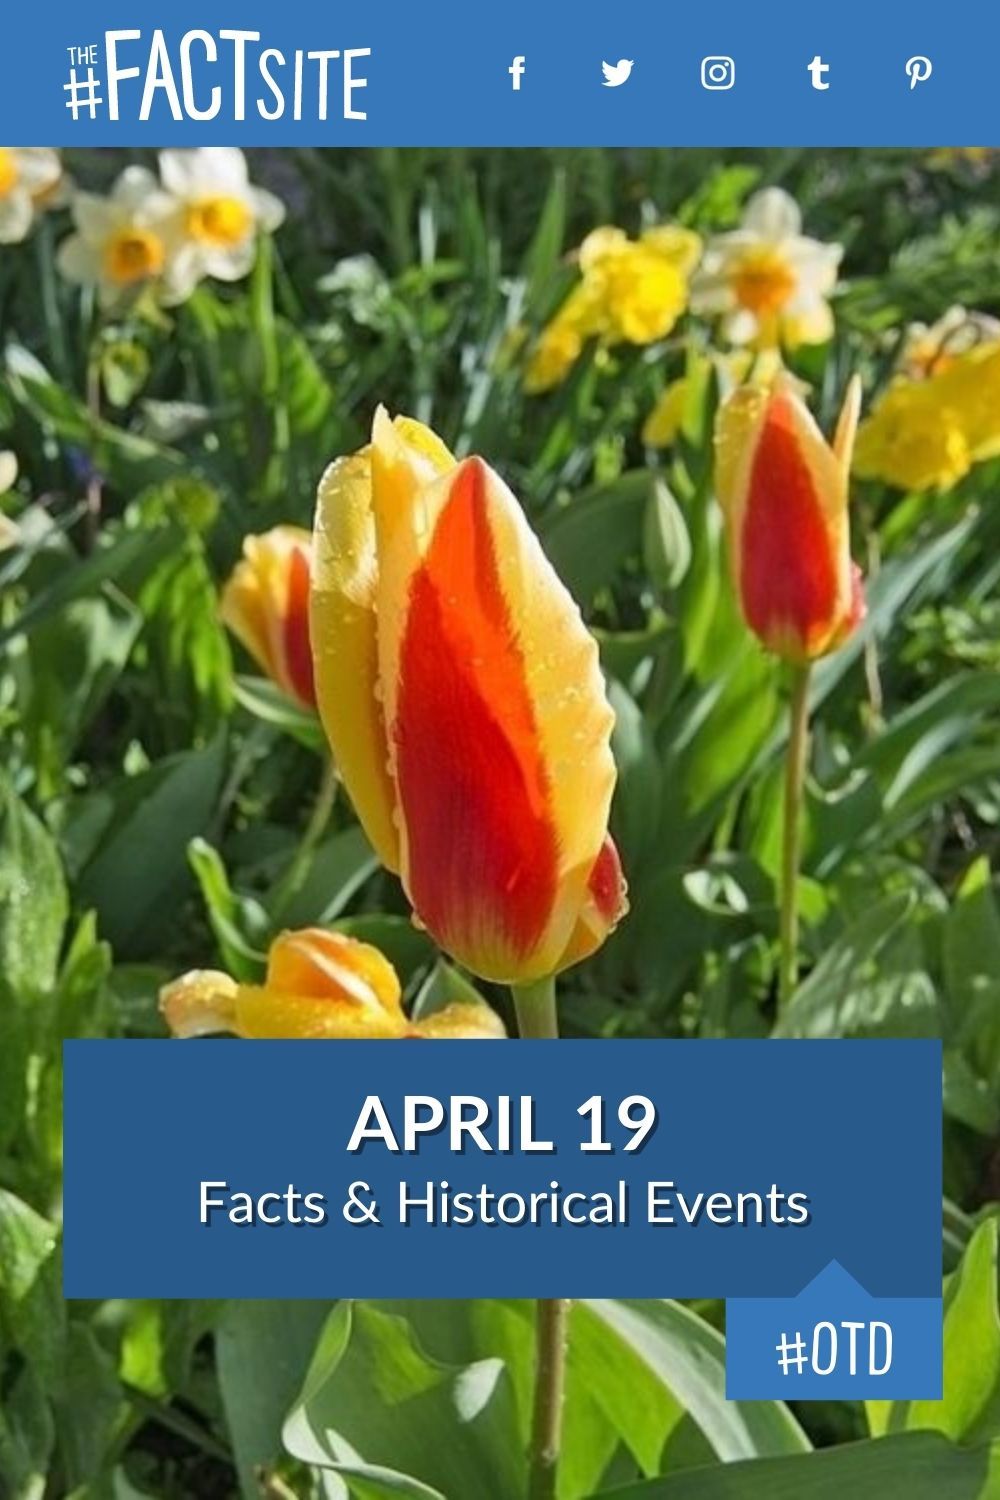 April 19 Facts & Historical Events On This Day The Fact Site